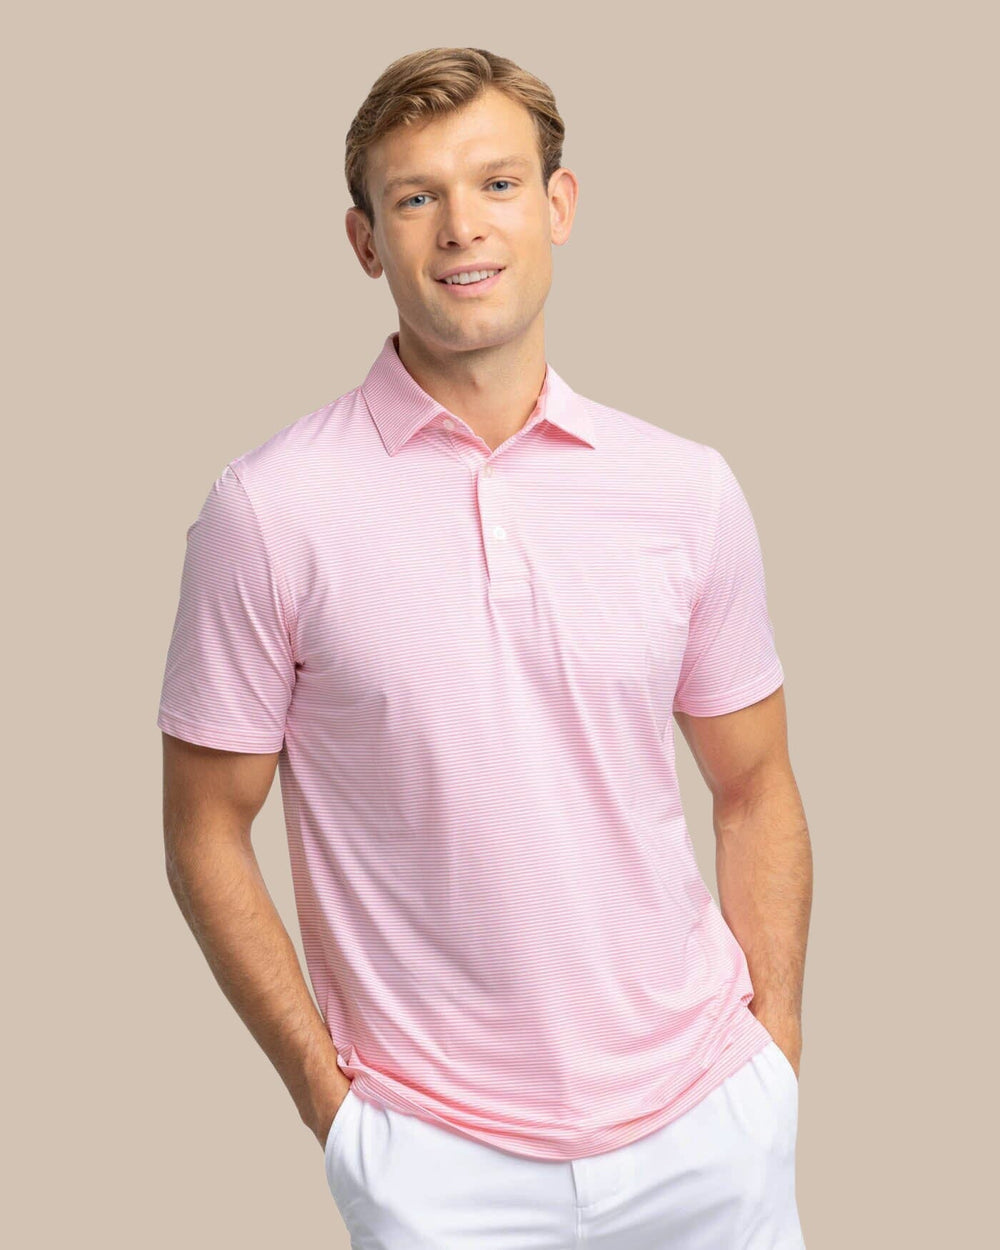 The front view of the Southern Tide brrr-eeze Meadowbrook Stripe Polo by Southern Tide - Geranium Pink